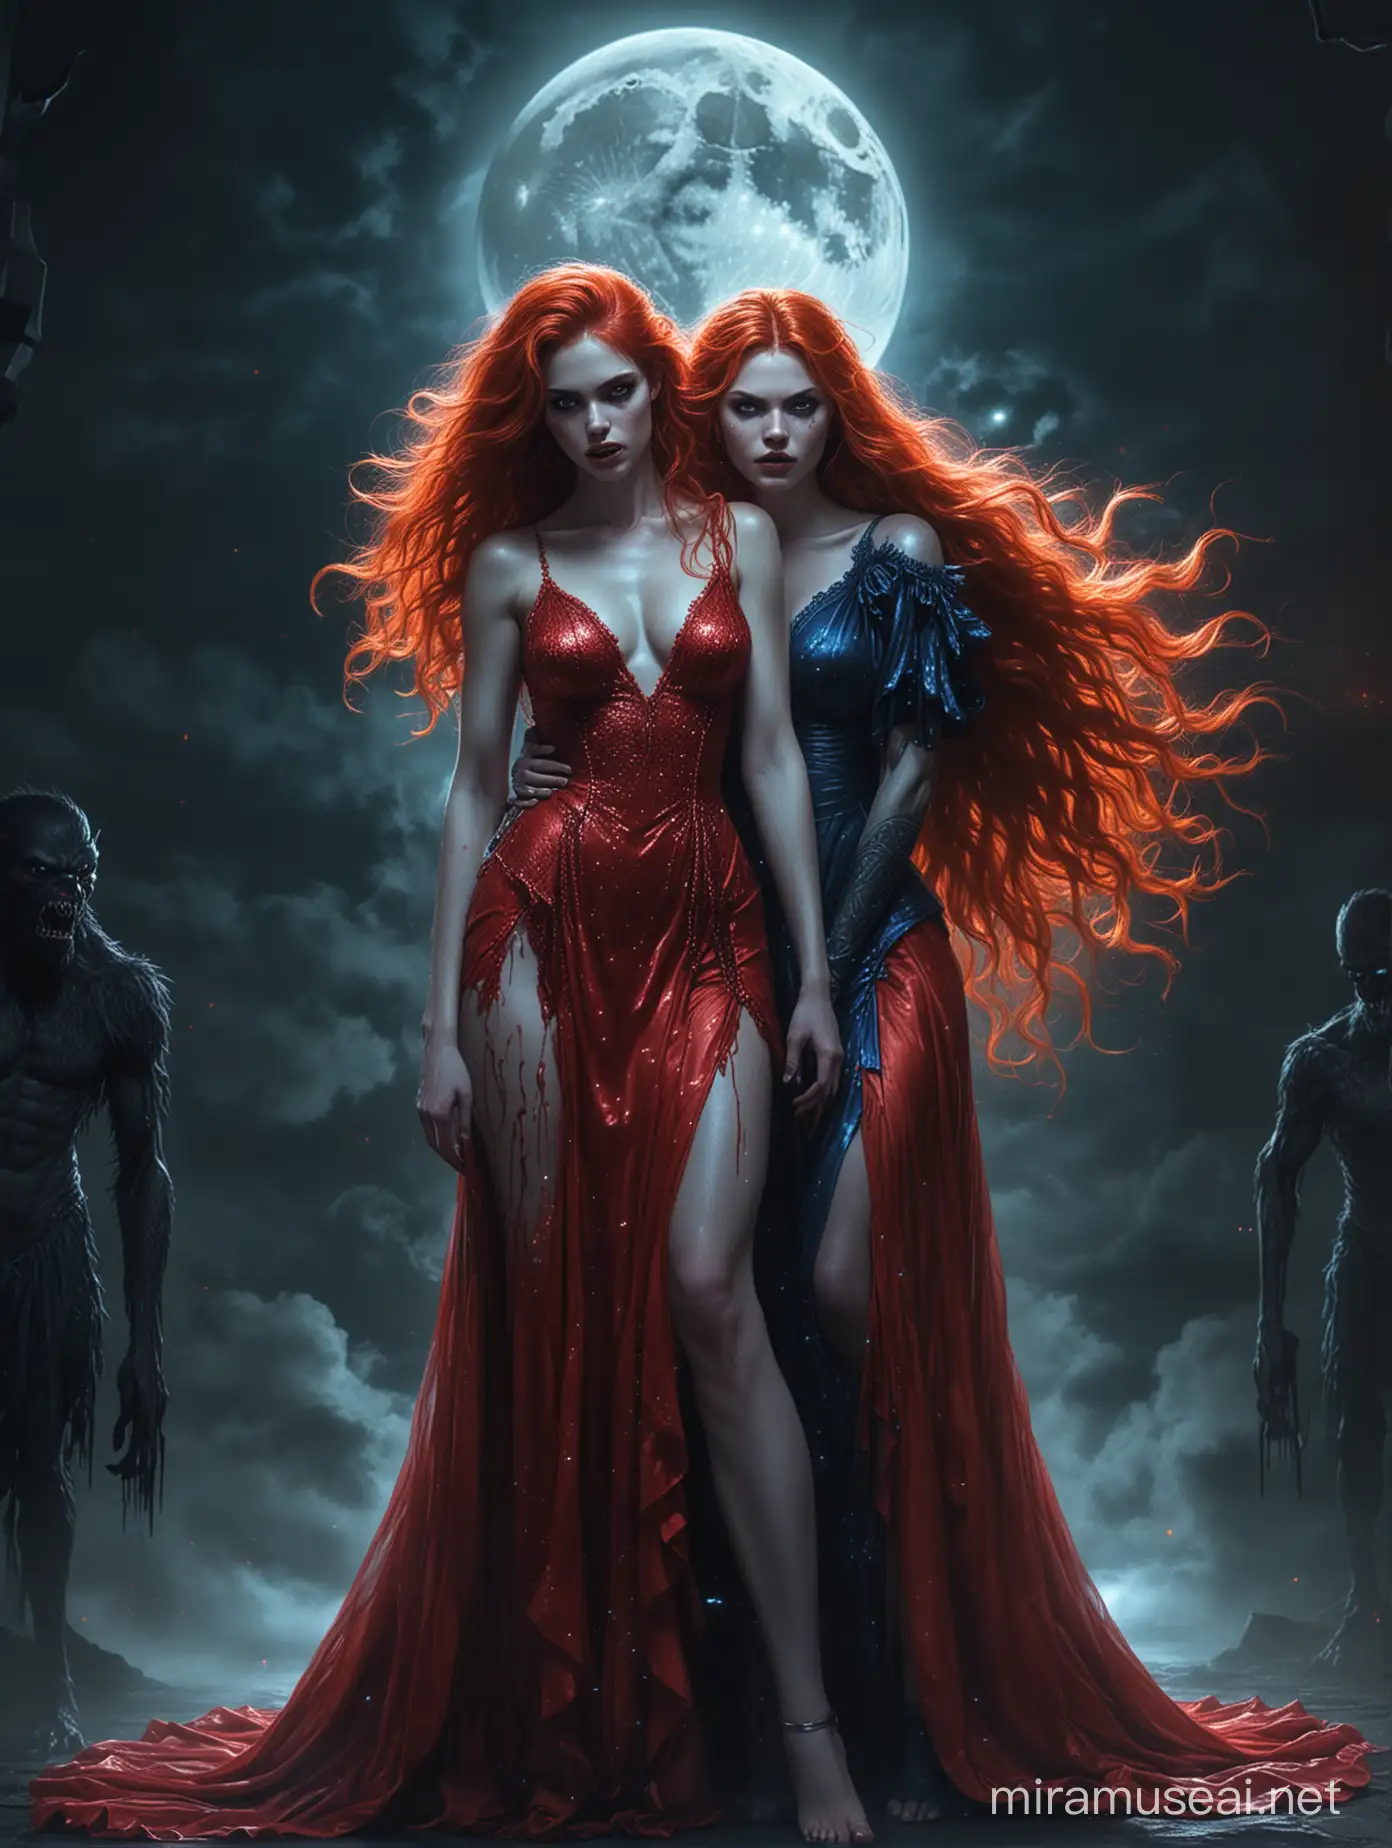 Glowing Red and Blue Ladies with Fierce Werewolf Under the Goddess Moon